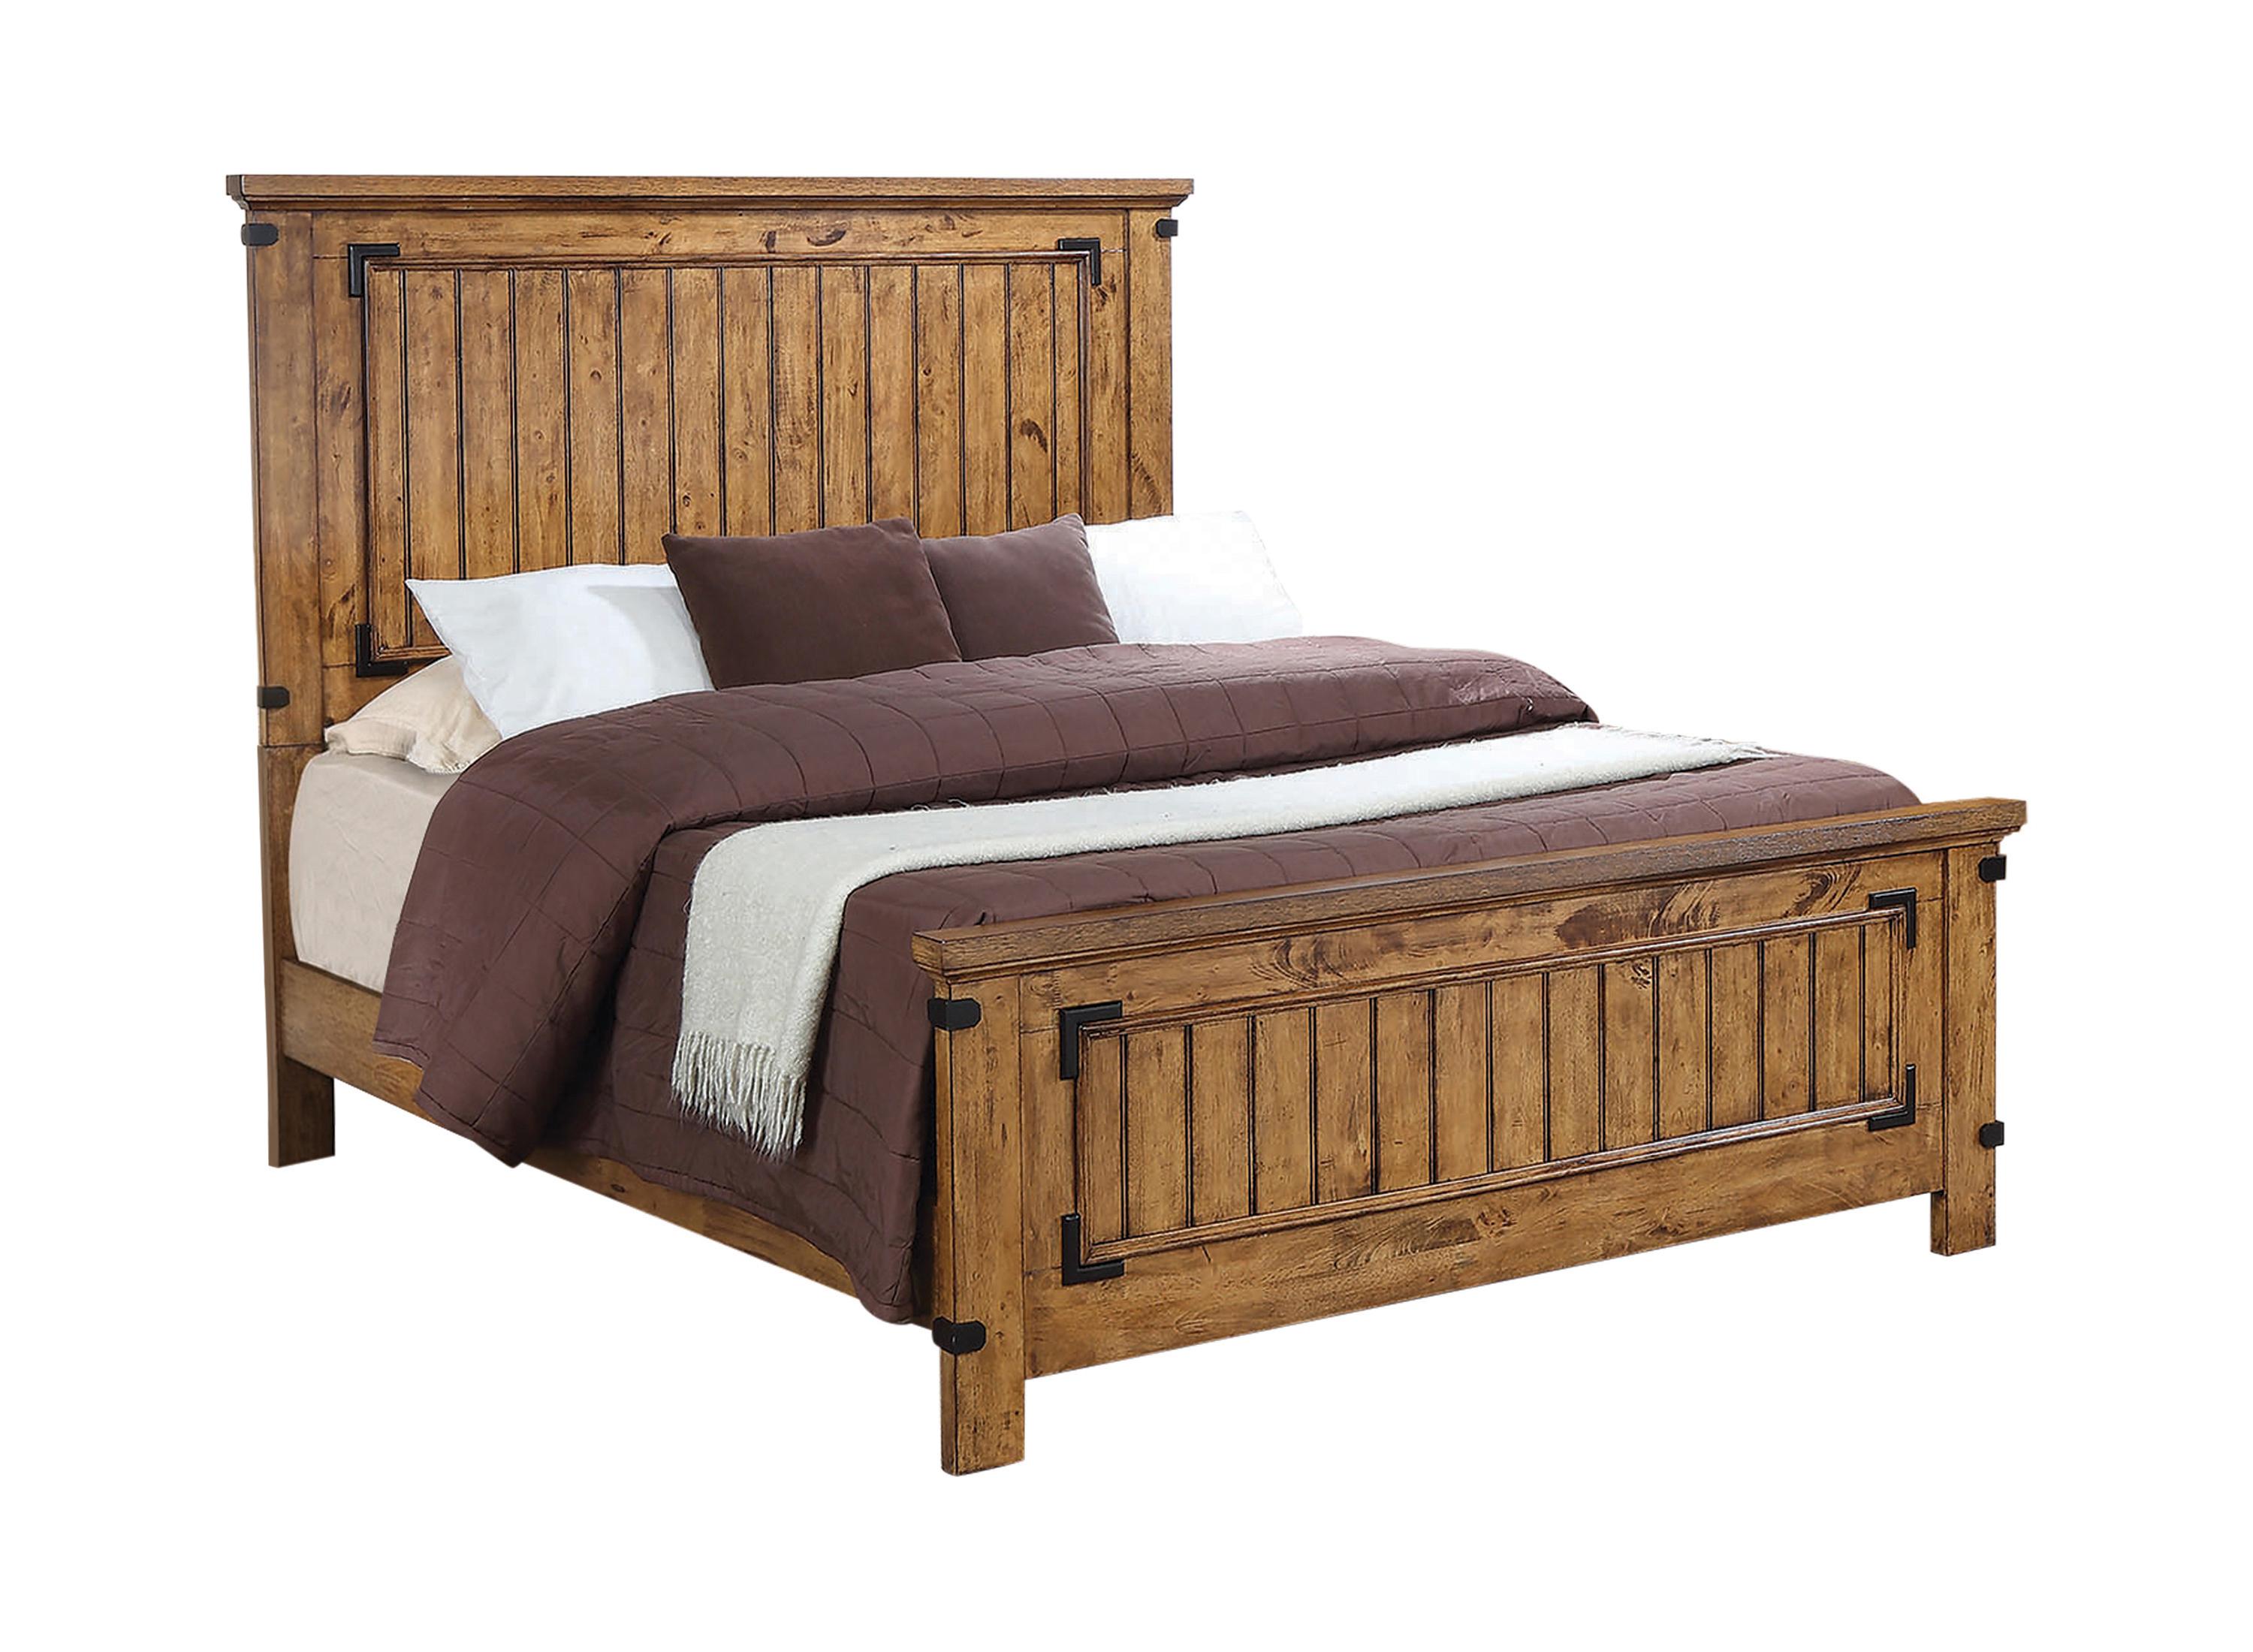 Farmhouse Bed 205261KW Brenner 205261KW in Brown 